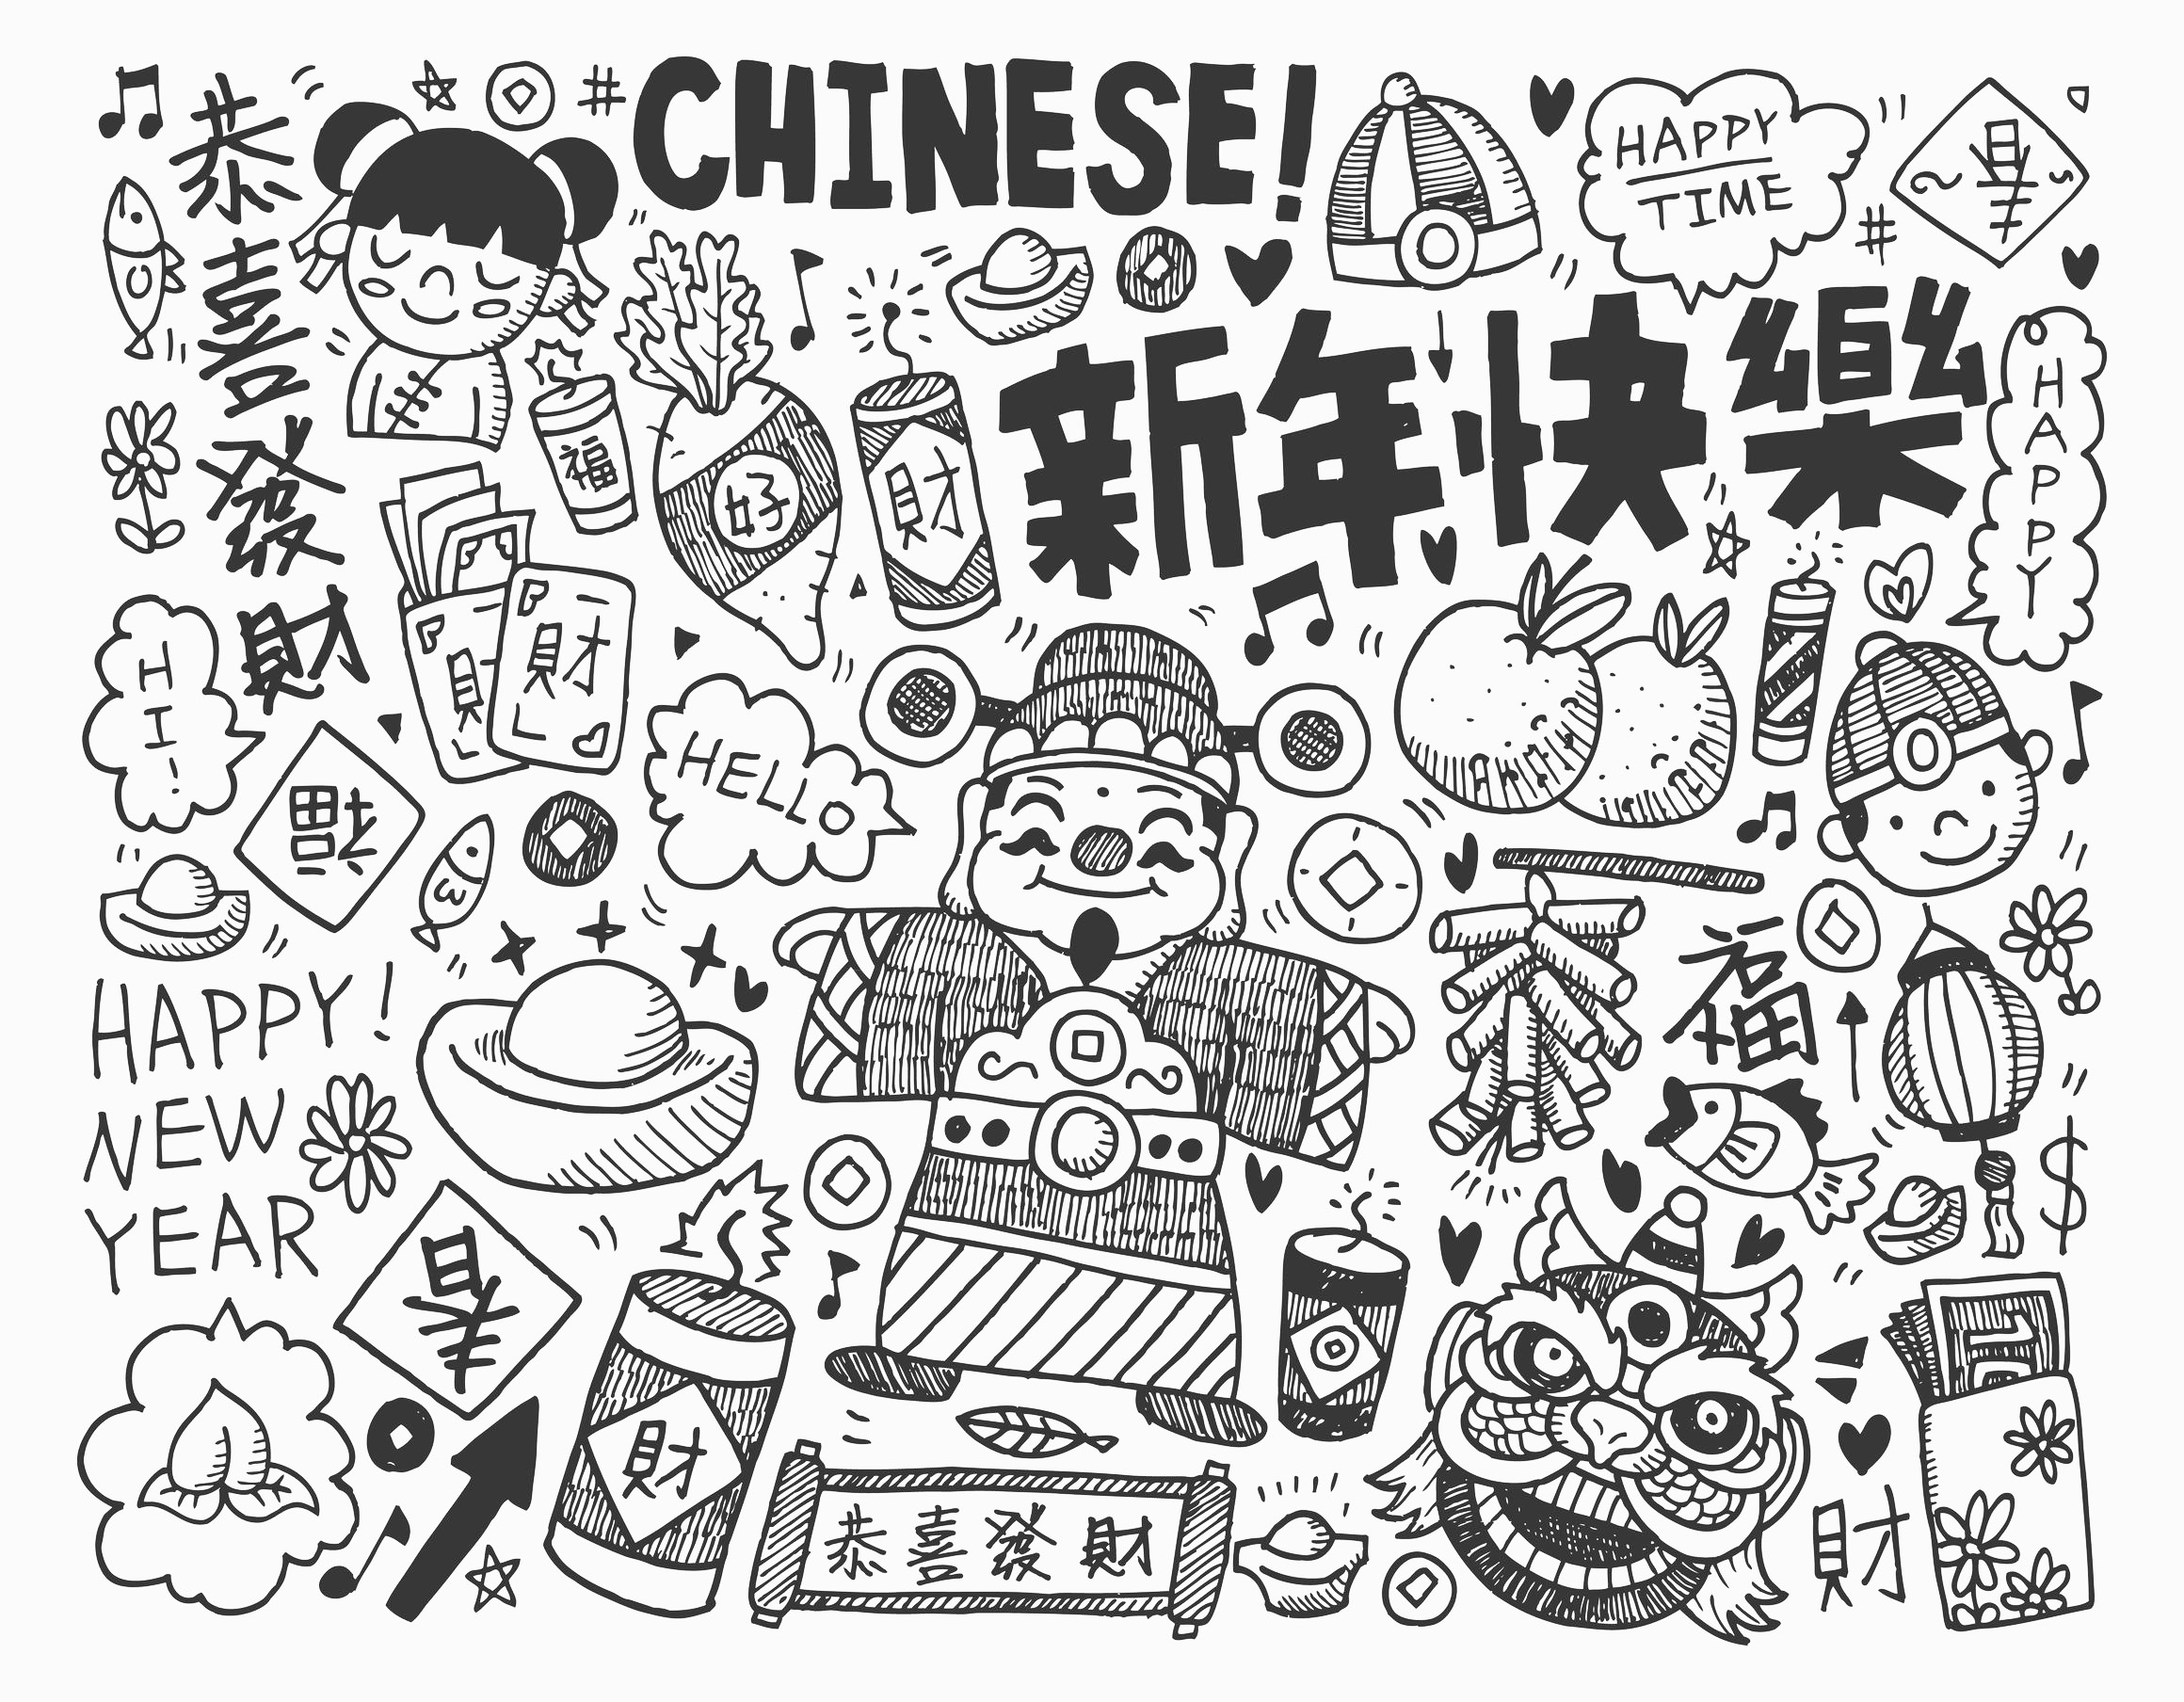 An incredible Doodle to celebrate the Chinese New Year, Artist : Notkoo2008   Source : 123rf